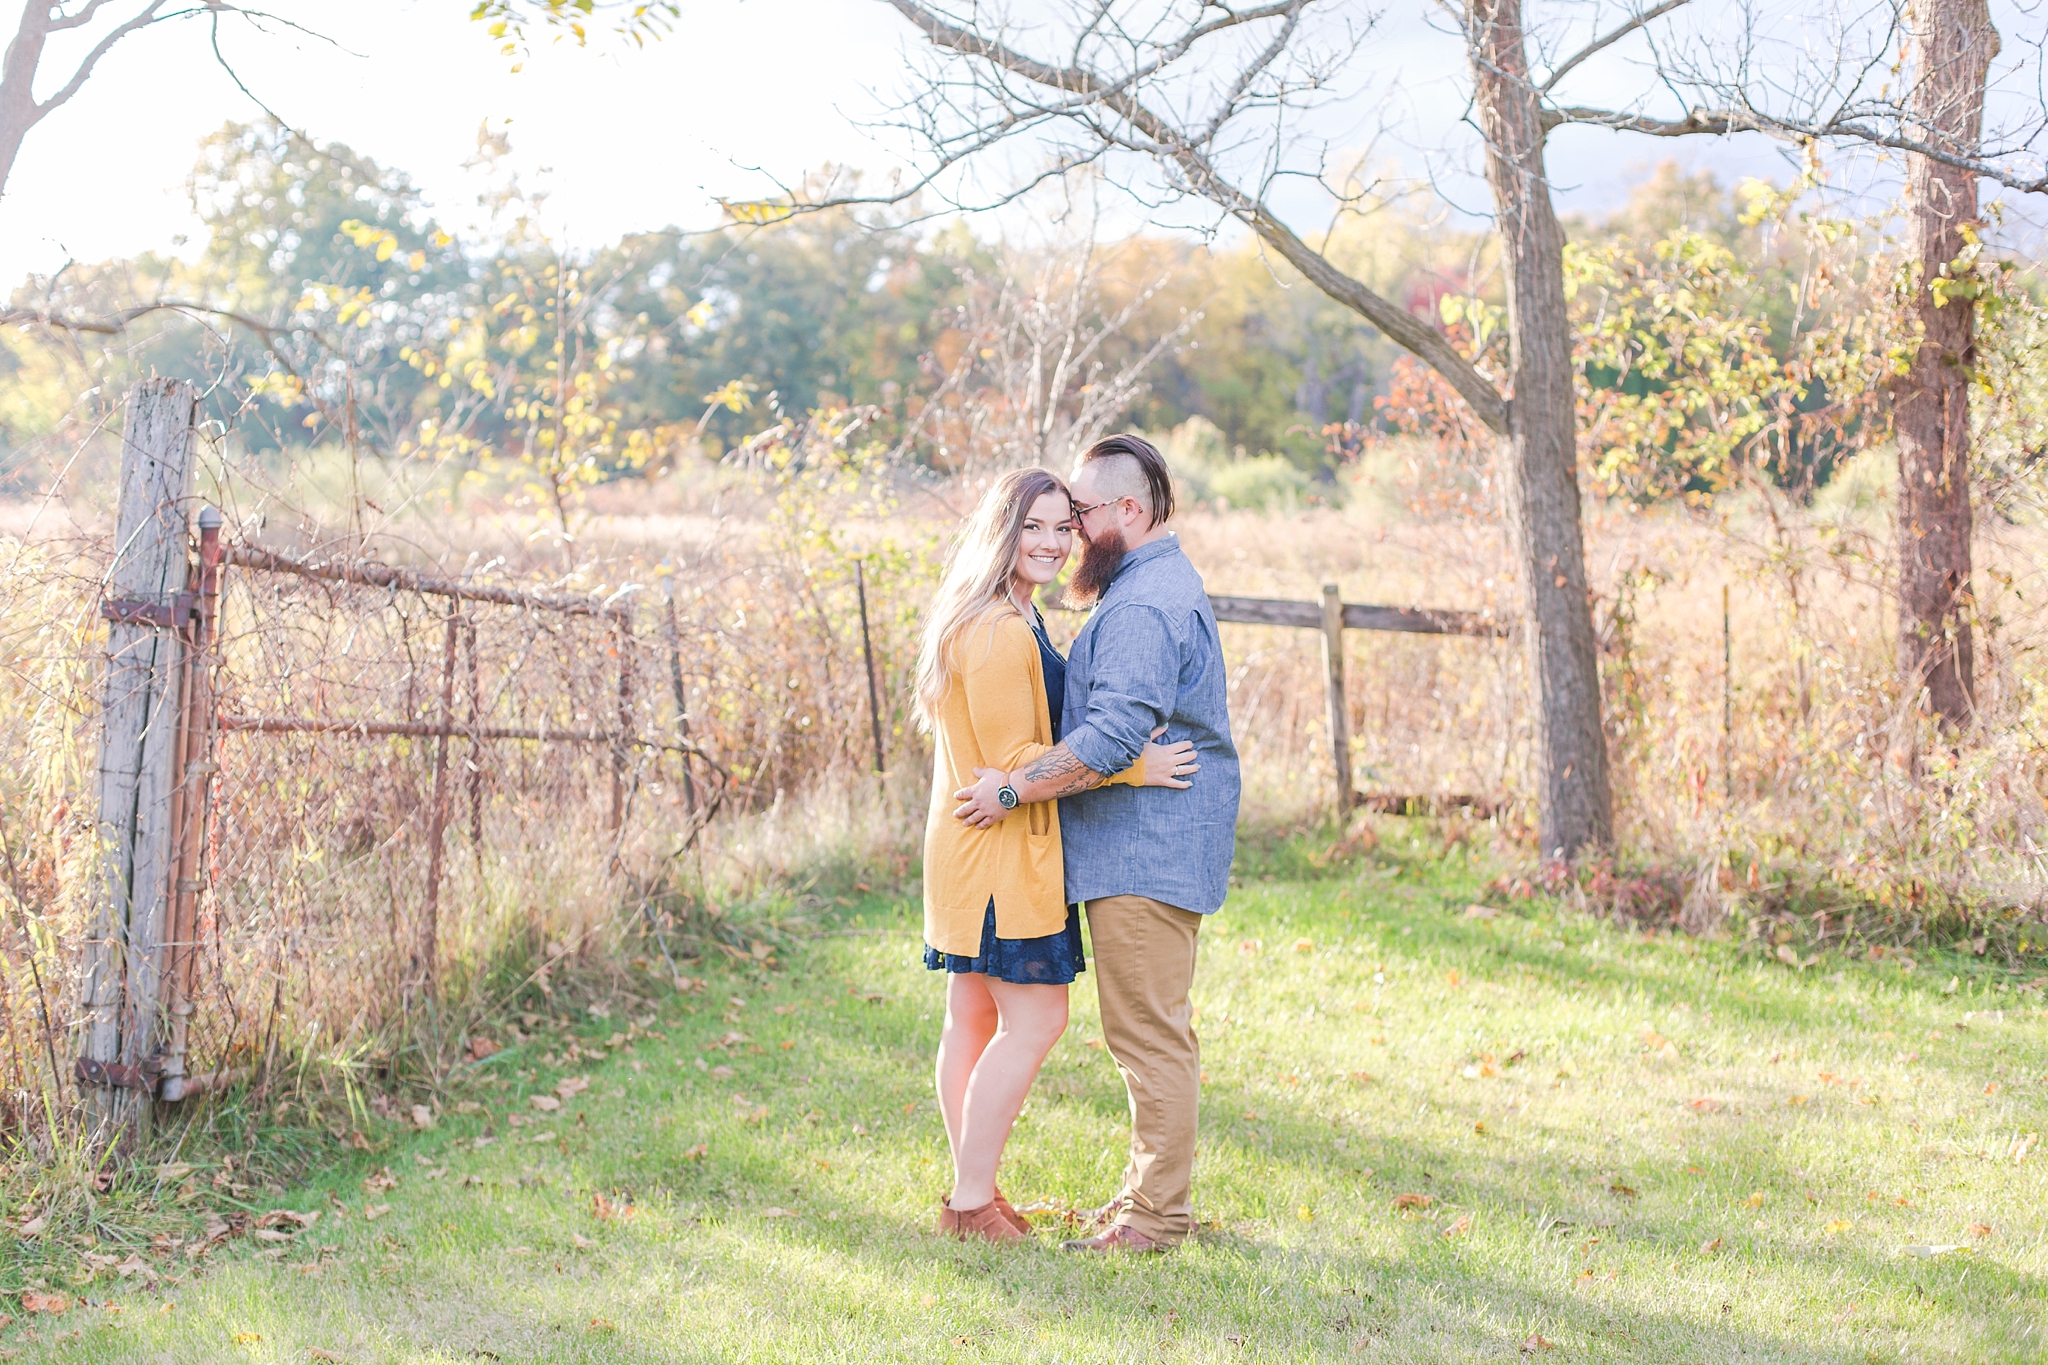 cozy-fall-engagement-photos-at-an-old-family-farm-in-monroe-michigan-by-courtney-carolyn-photography_0009.jpg